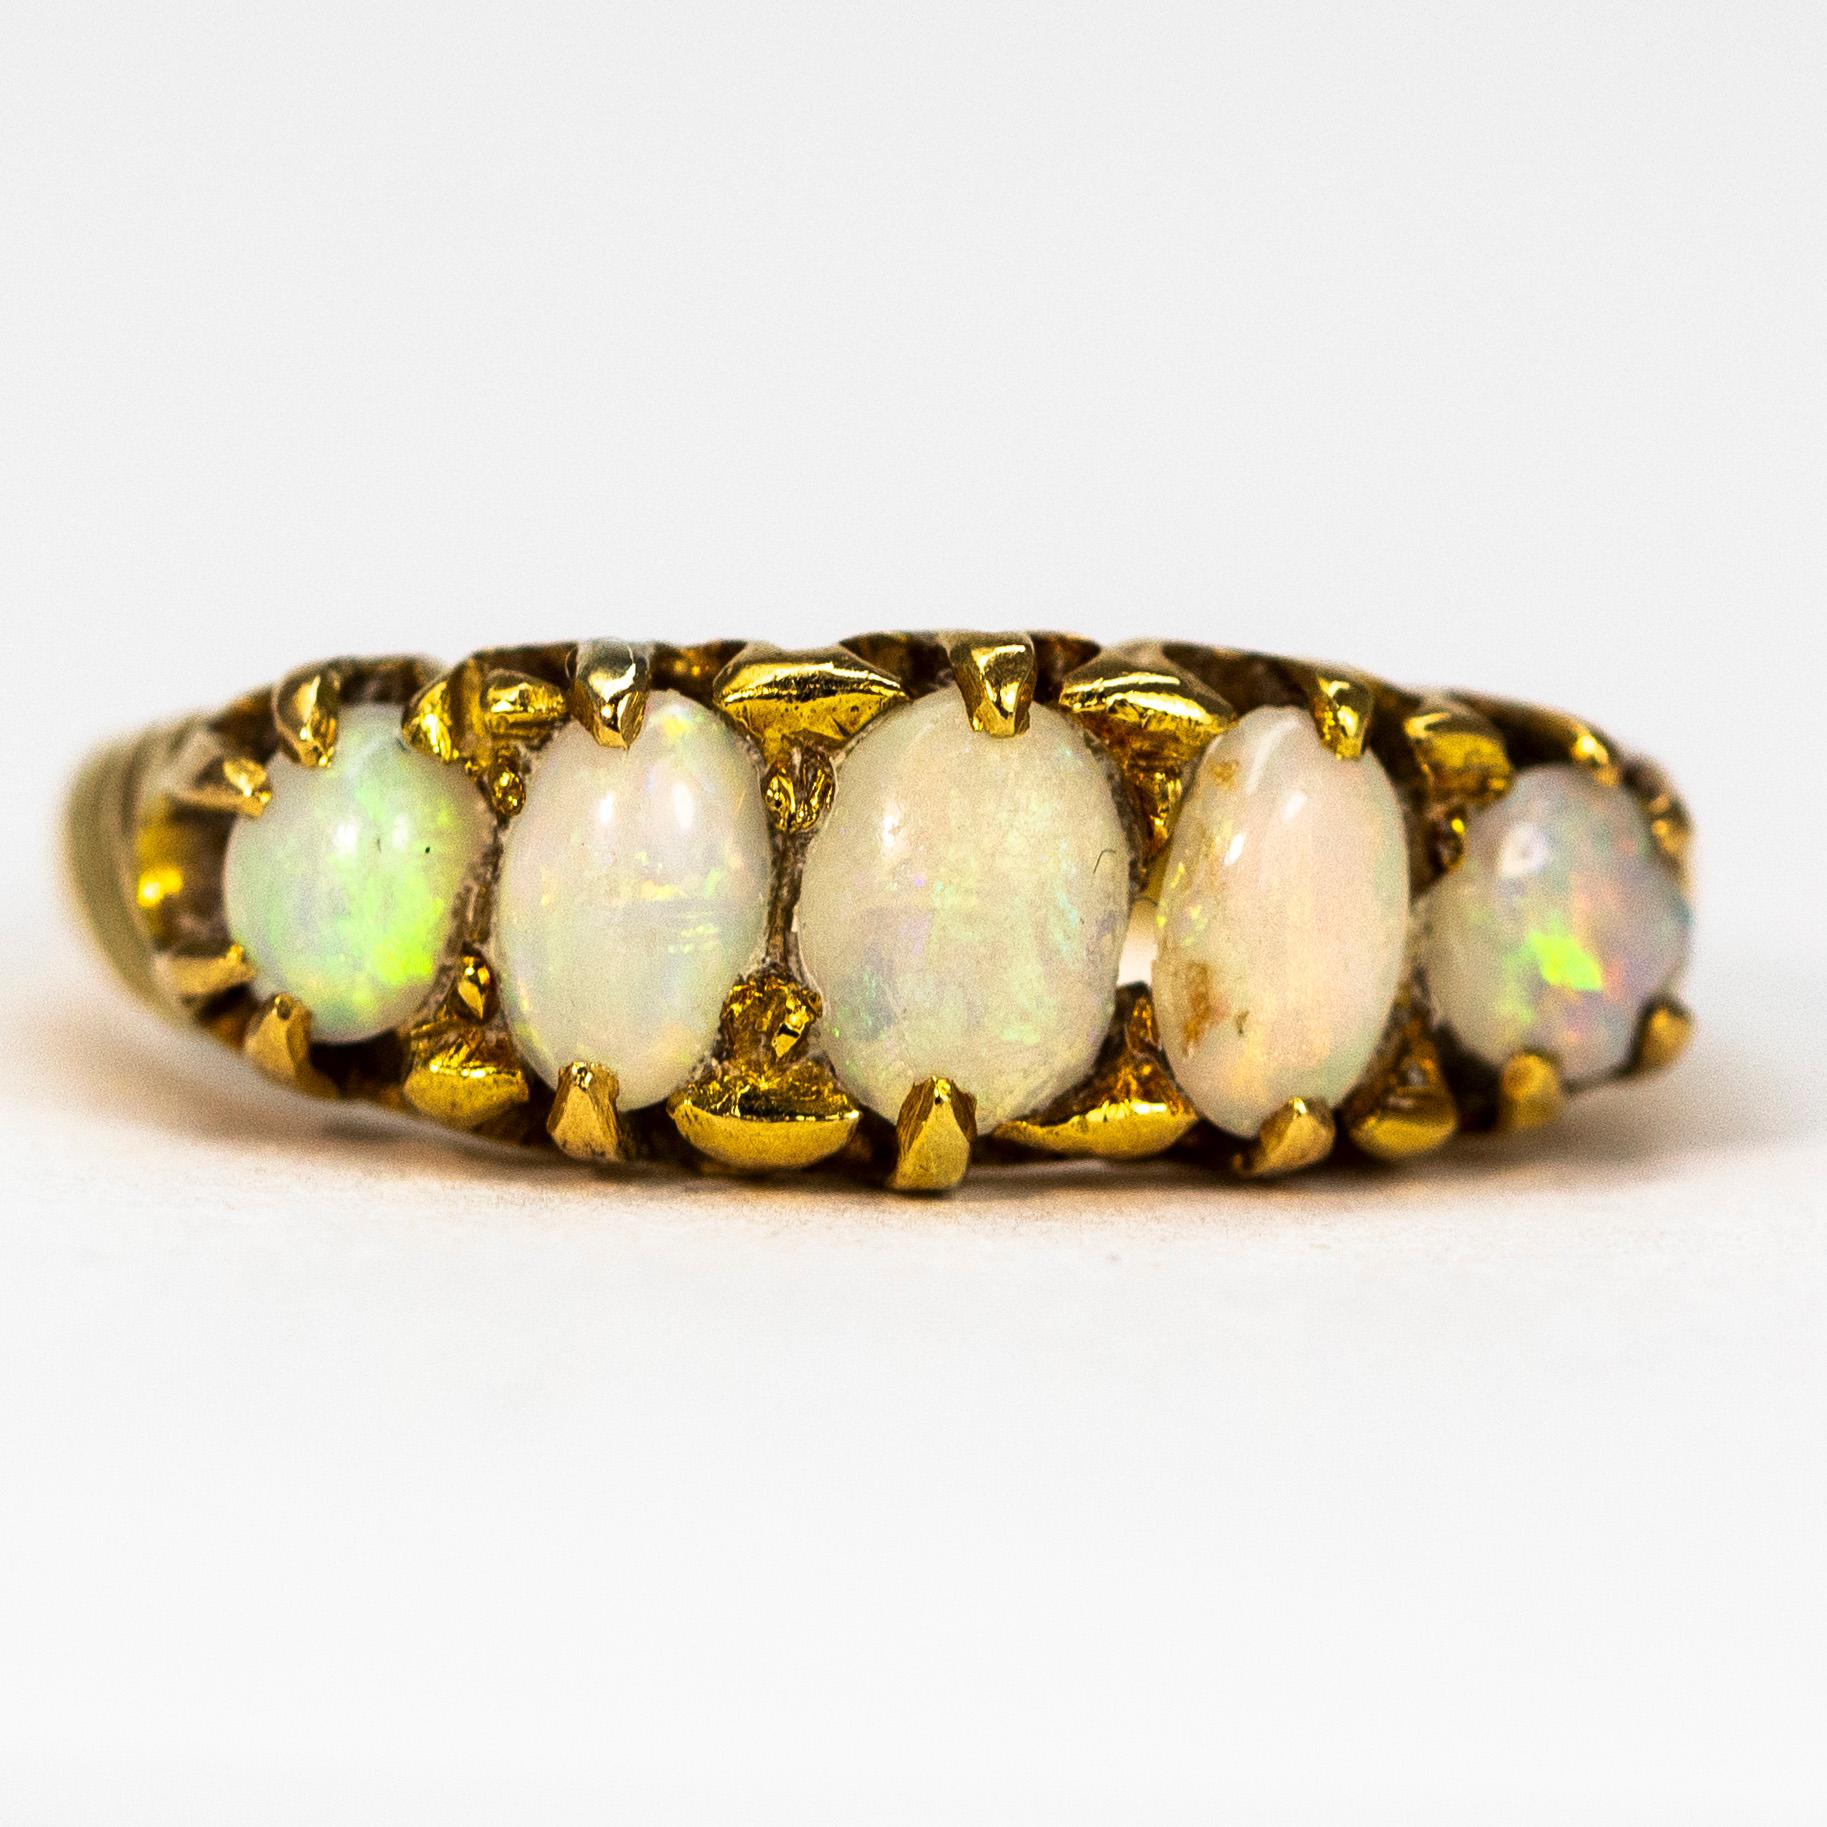 This gorgeous five stone ring holds five shimmering opals which reflect so many colours as the light hits them. The stones are set flush within the band  in simple claw settings. Made in Chester, England and modelled in 18ct gold.

Ring Size: M or 6